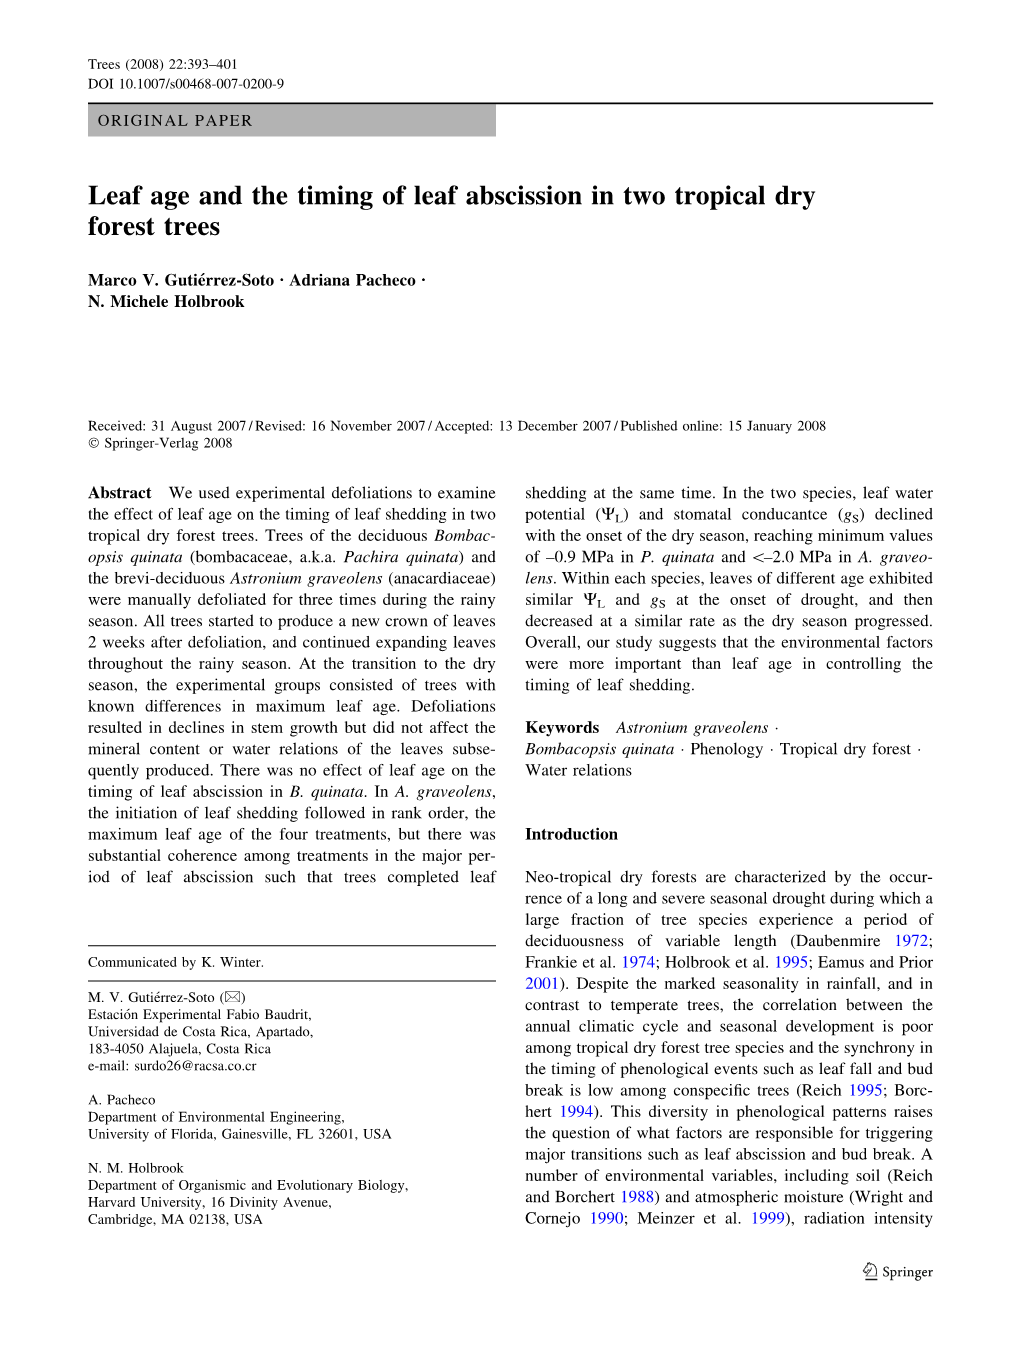 Leaf Age and the Timing of Leaf Abscission in Two Tropical Dry Forest Trees